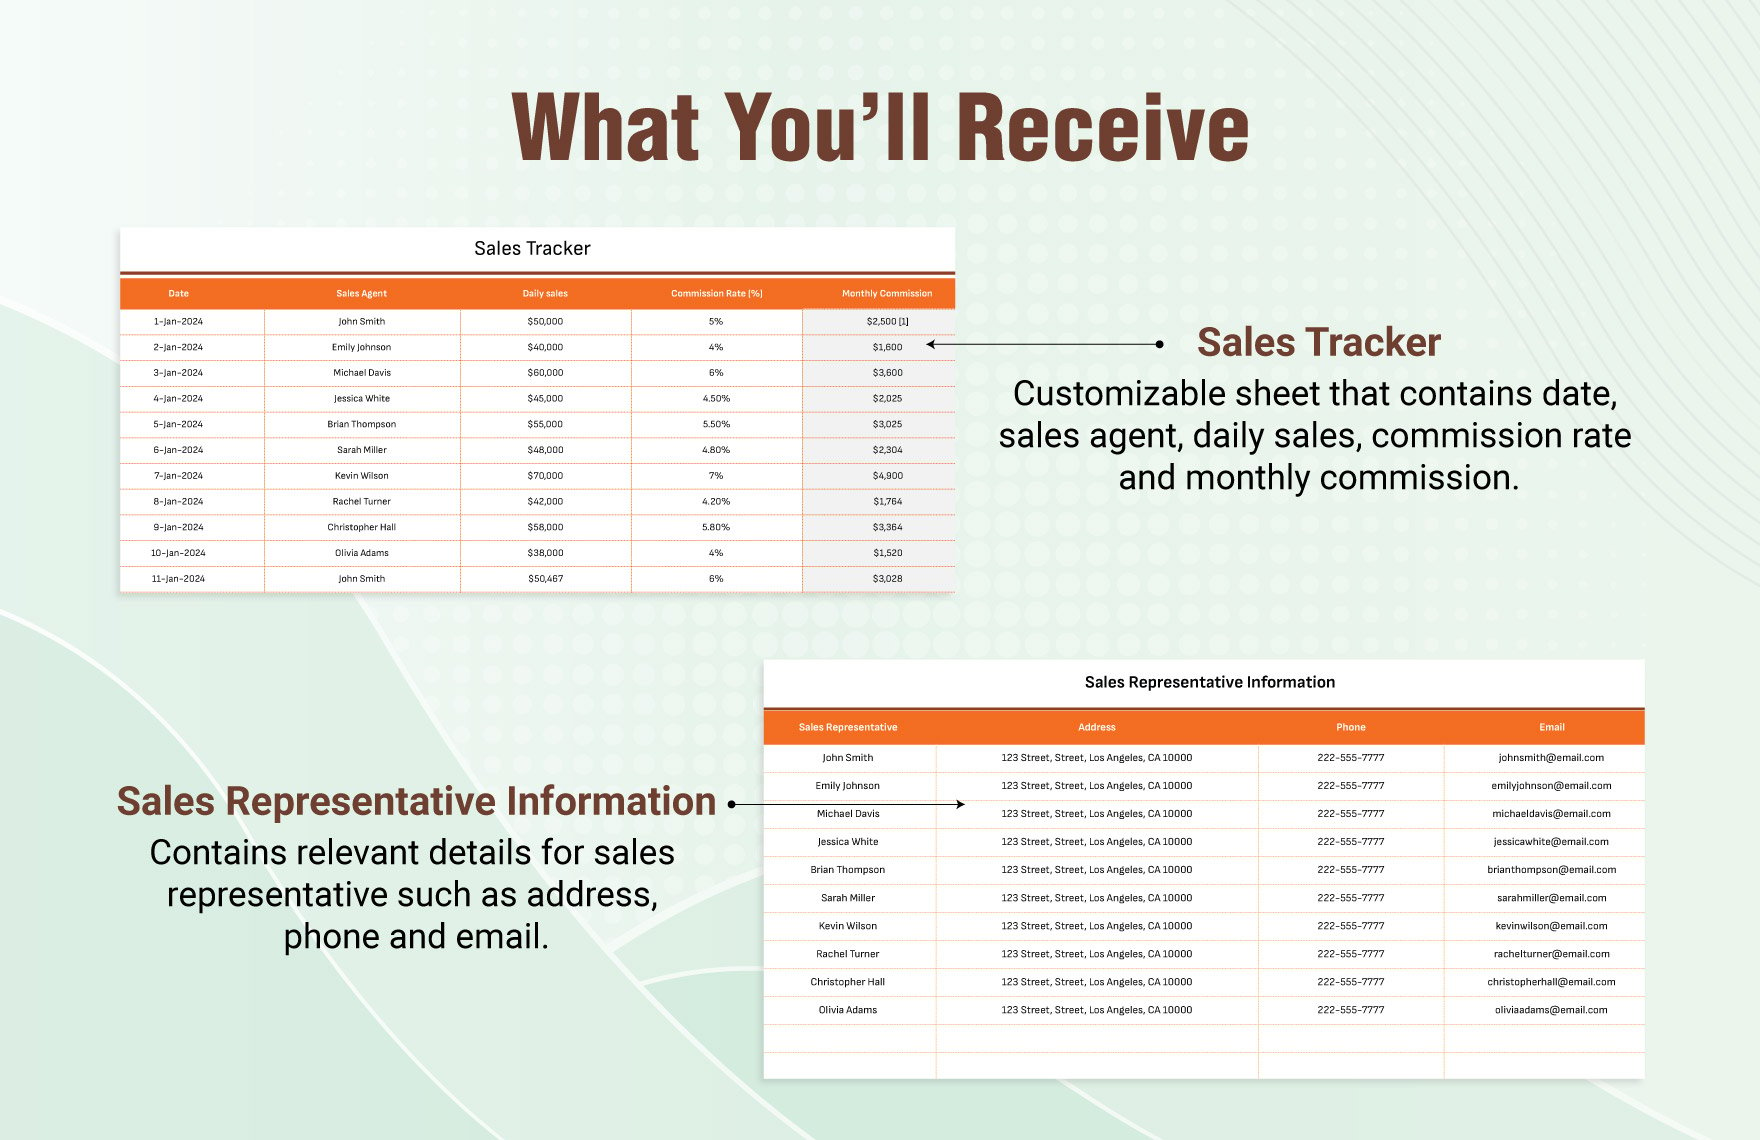 Sales Monthly and Quarterly Commission Comparison Template